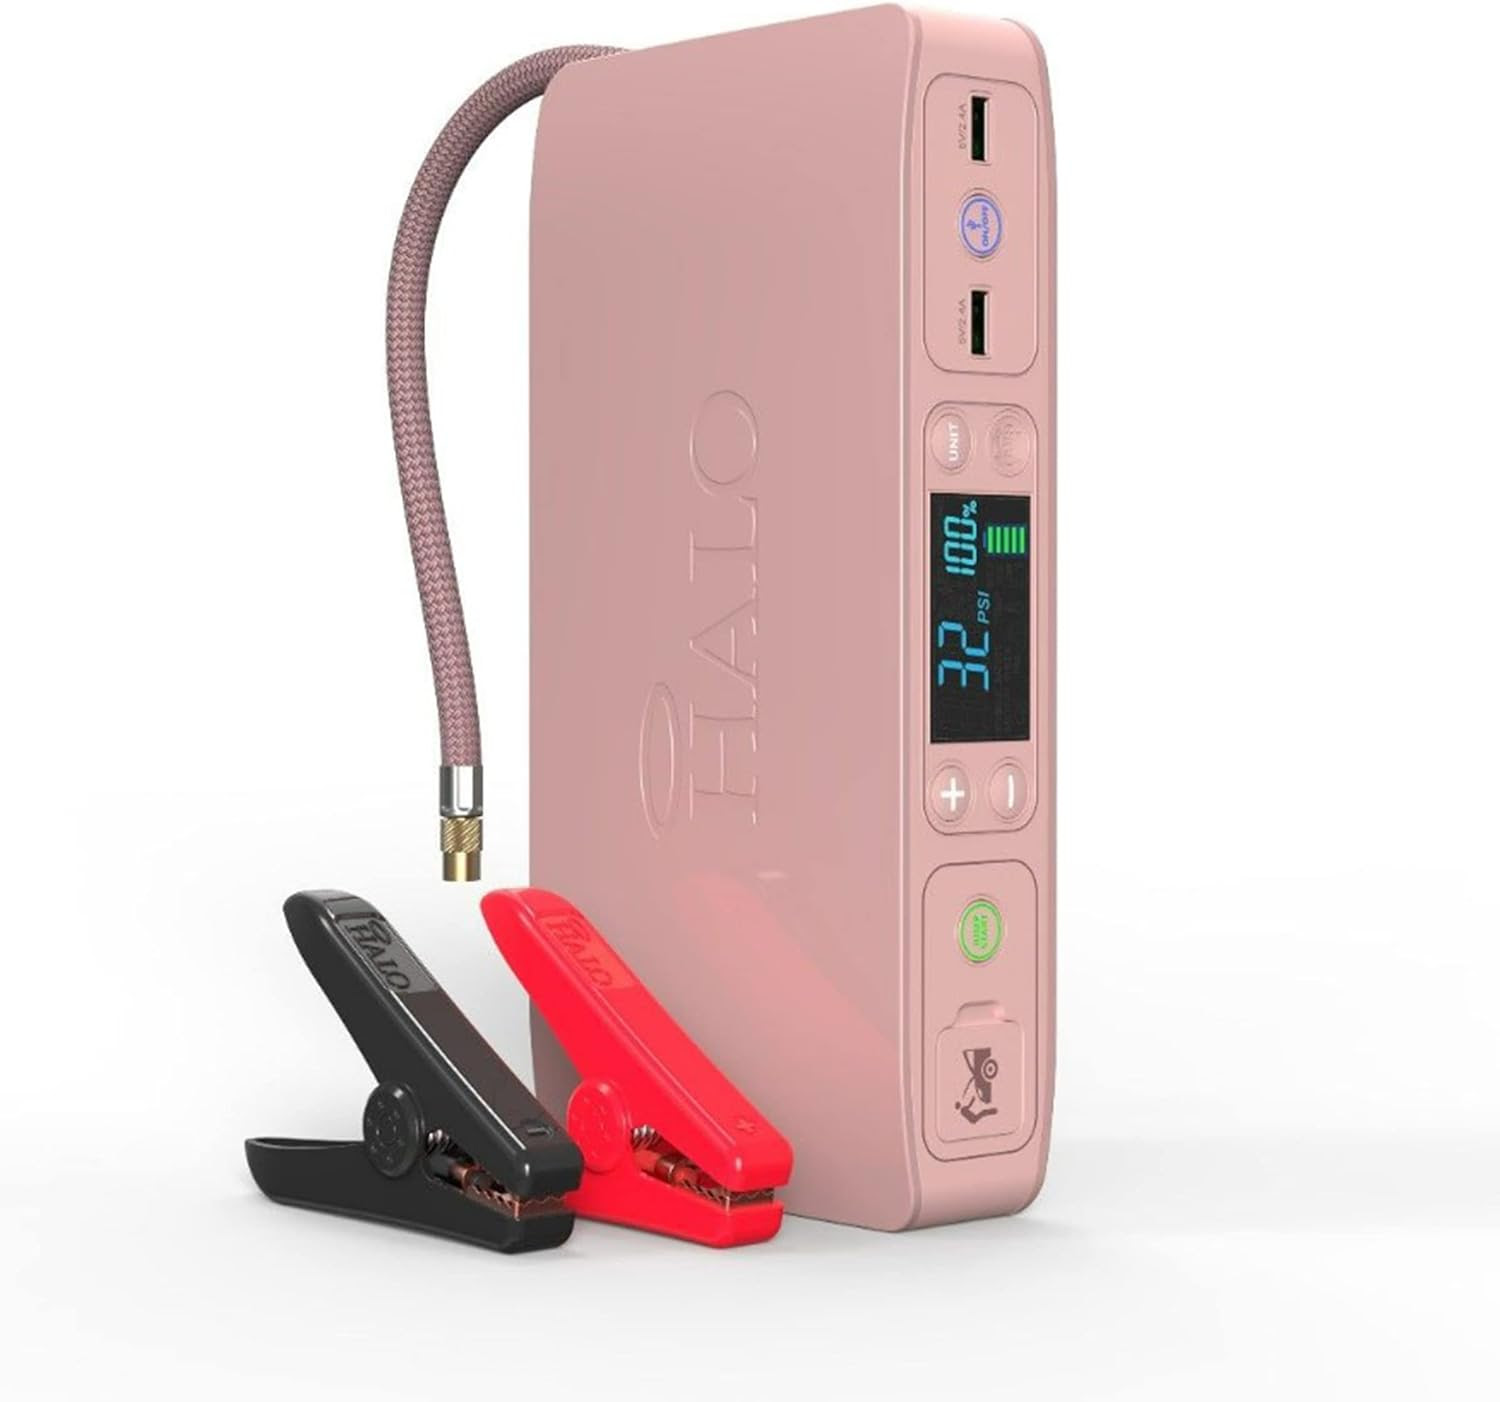 HALO Portable Vehicle Jump Starter with Air Compressor Power Bank. 1000 units. 